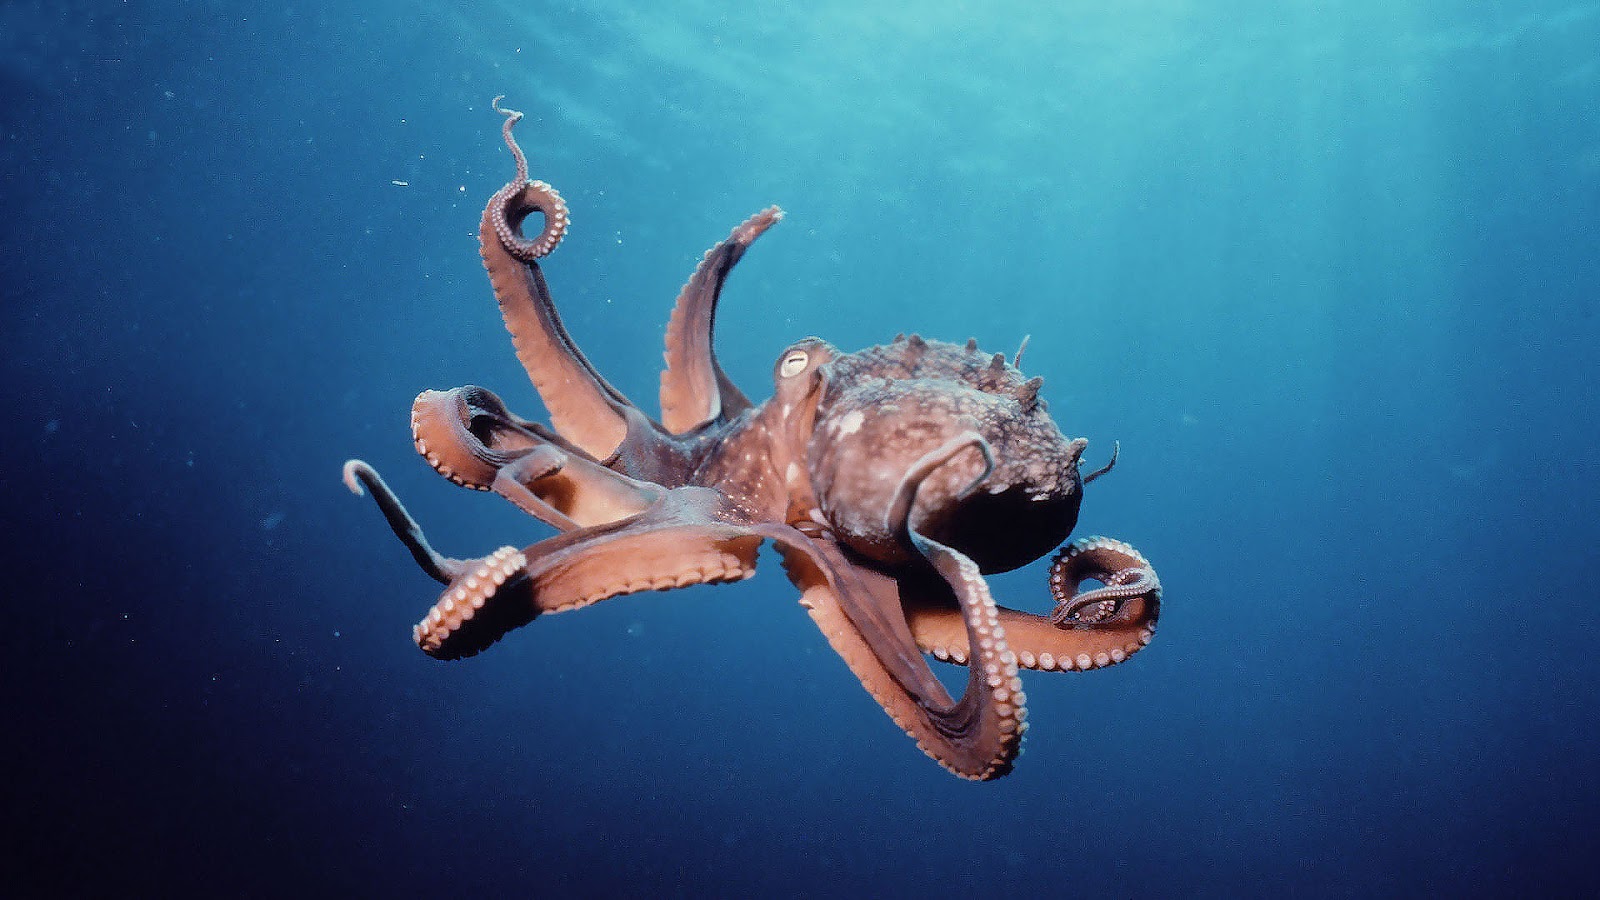 http://4.bp.blogspot.com/-IEG0lu12dvs/UDfzldRbY8I/AAAAAAAABDc/PG009B4imSc/s1600/hd-octopus-wallpaper-with-a-red-octopus-swimming-underwater-octupus-wallpapers-backgrounds-pictures-paos.jpg